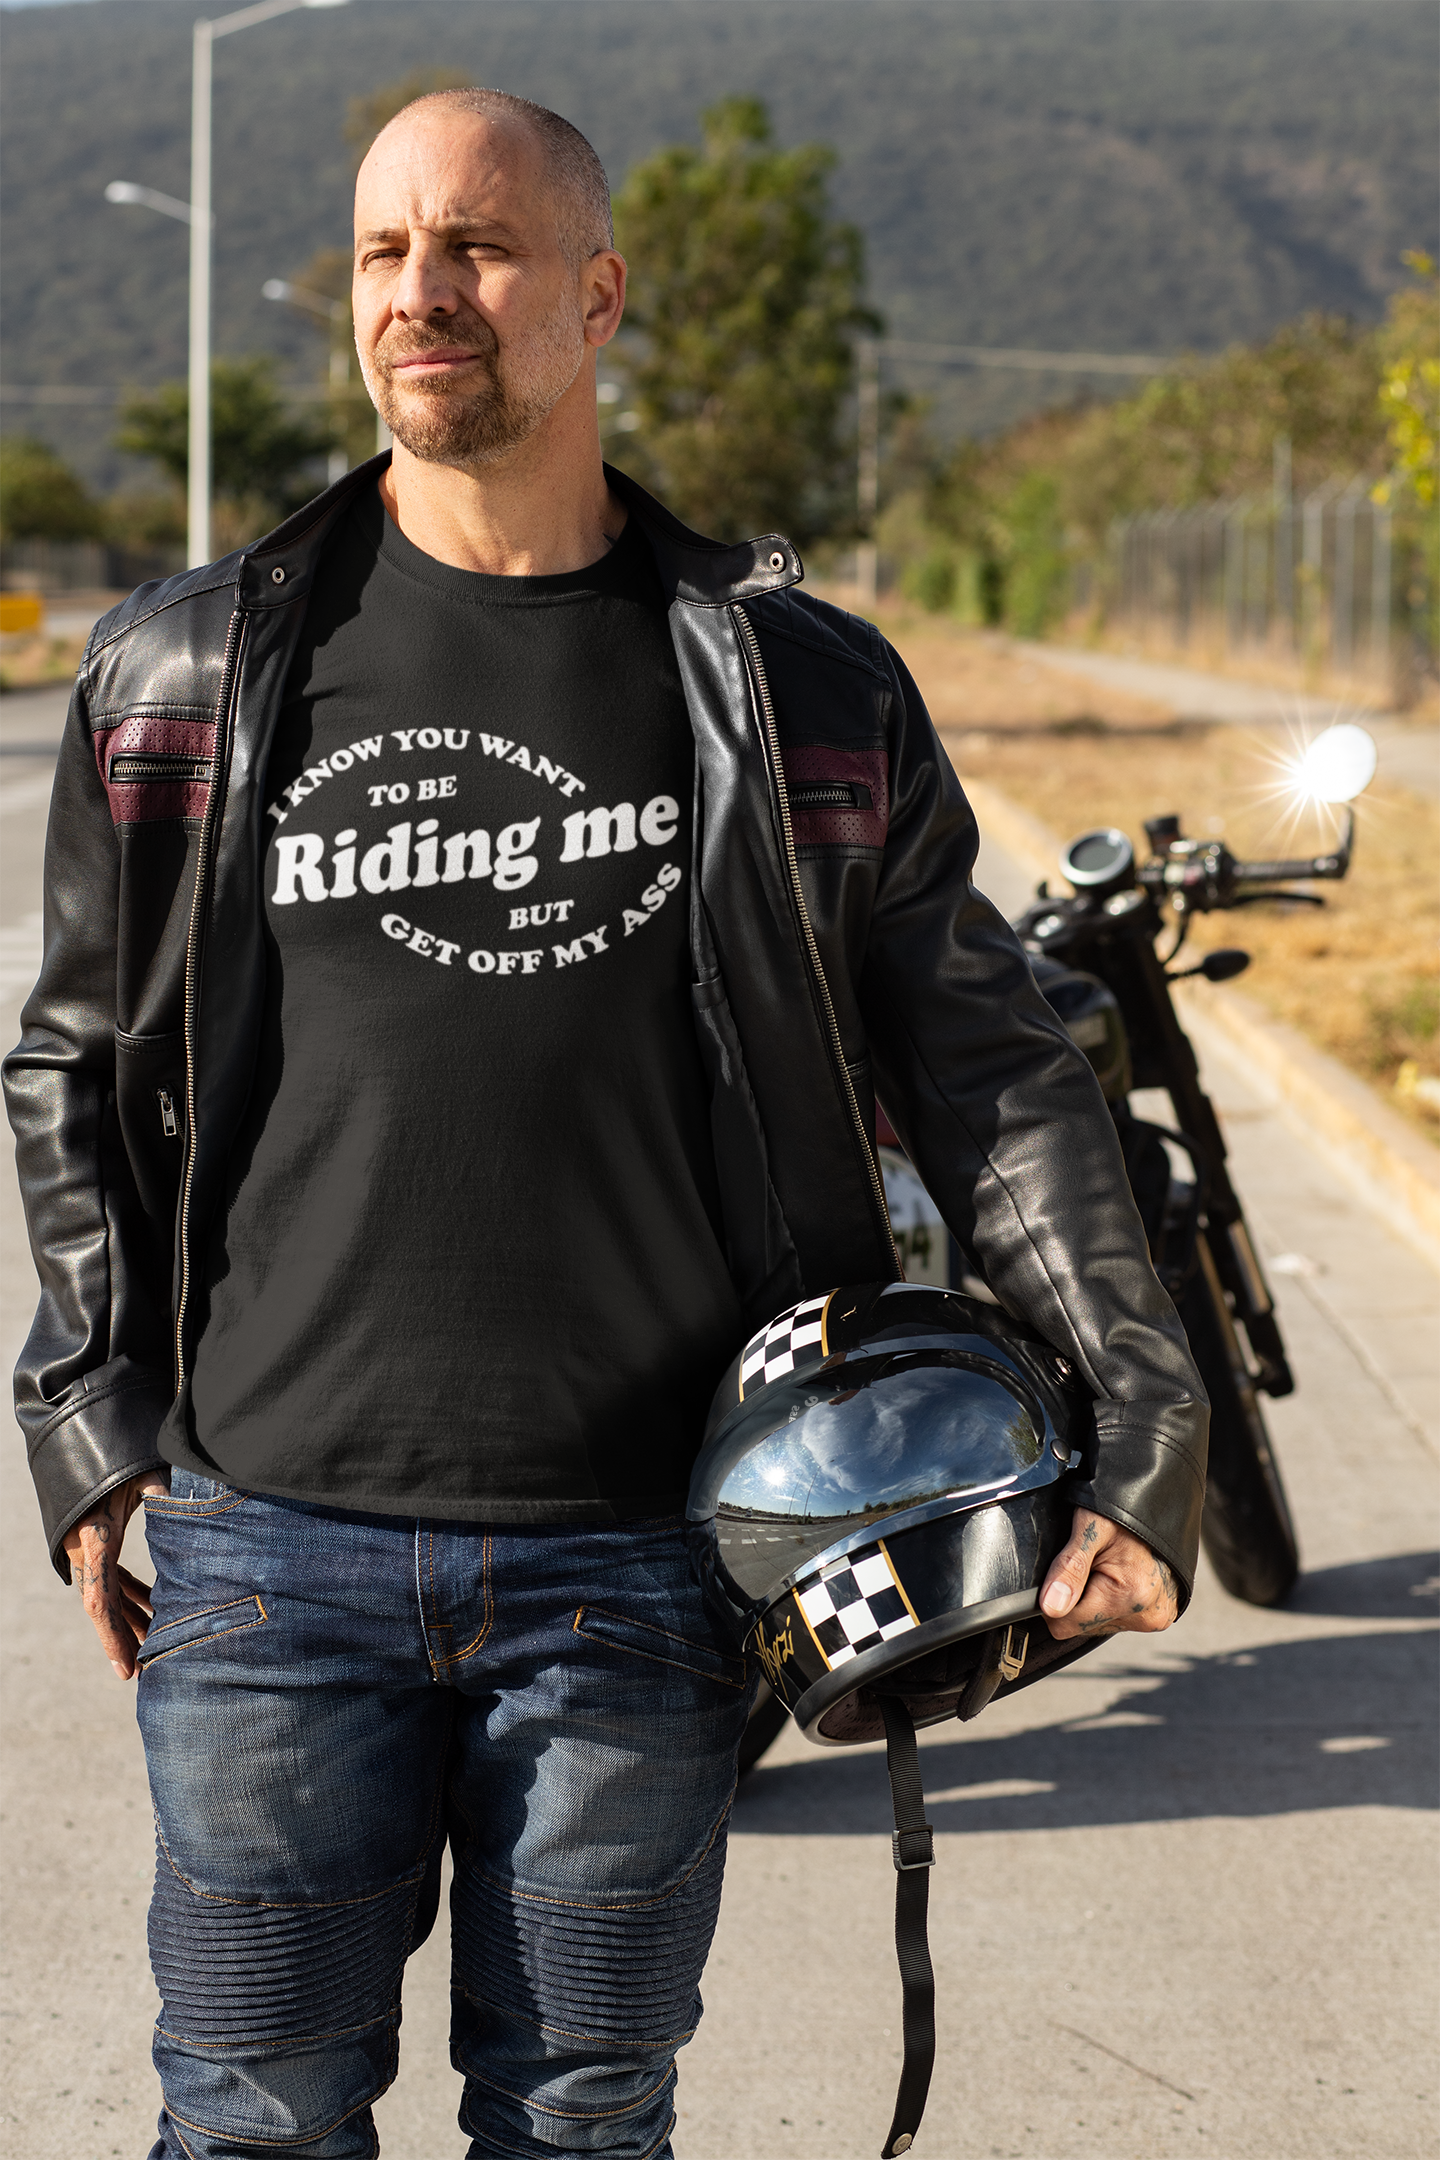 I Know You Want To Be Riding Me Unisex Tees